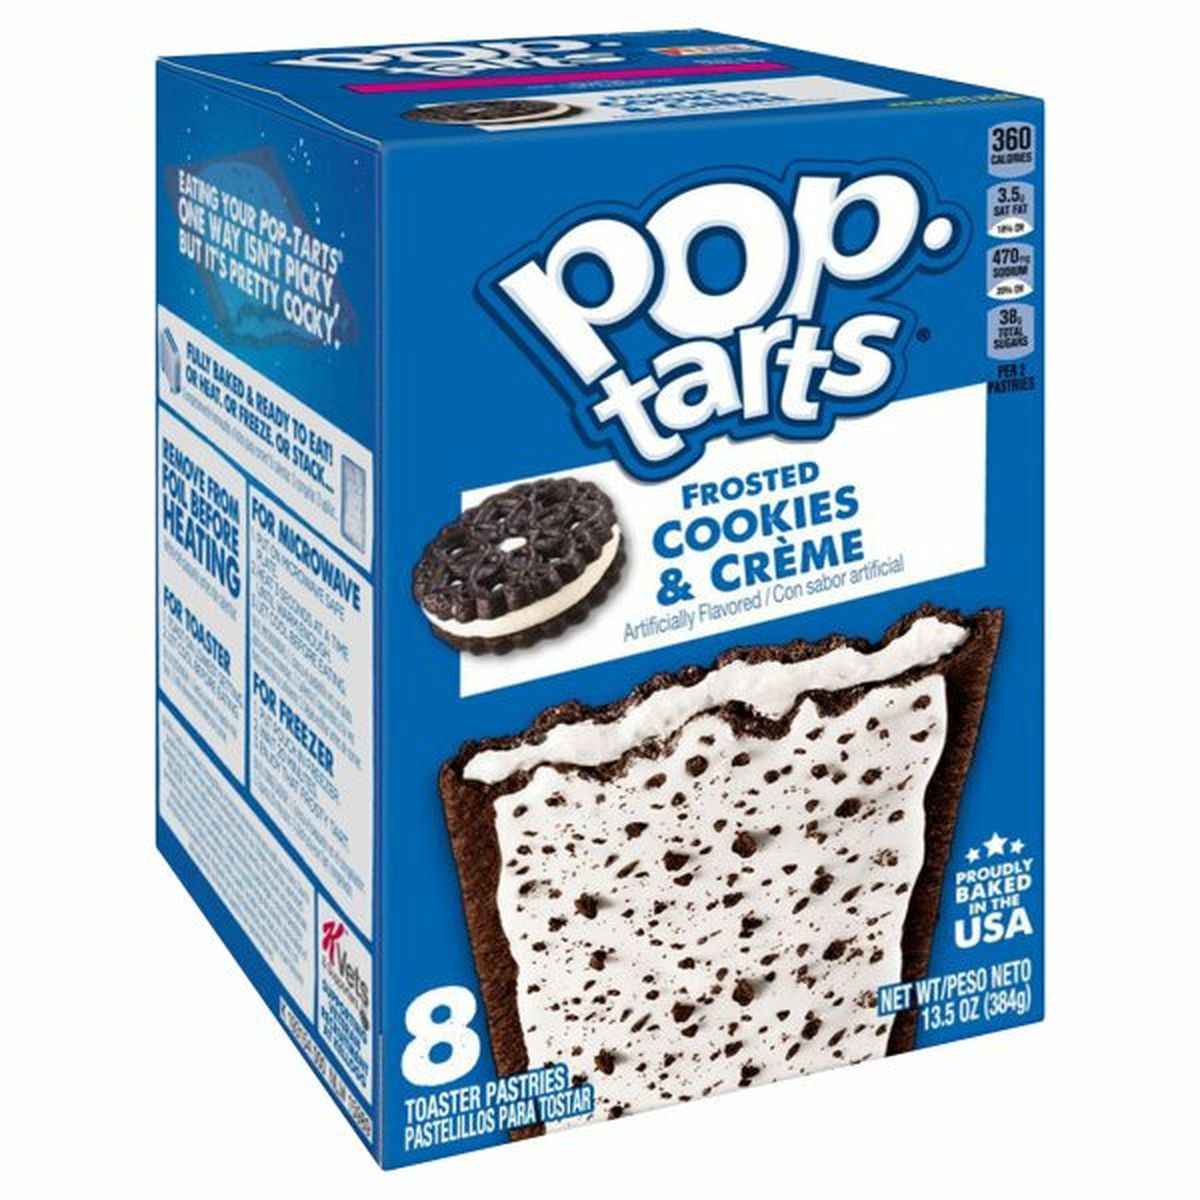 Calories in Kellogg's Pop-Tarts Toaster Pastries Breakfast Toaster Pastries, Frosted Cookies and Creme, Proudly Baked in the USA